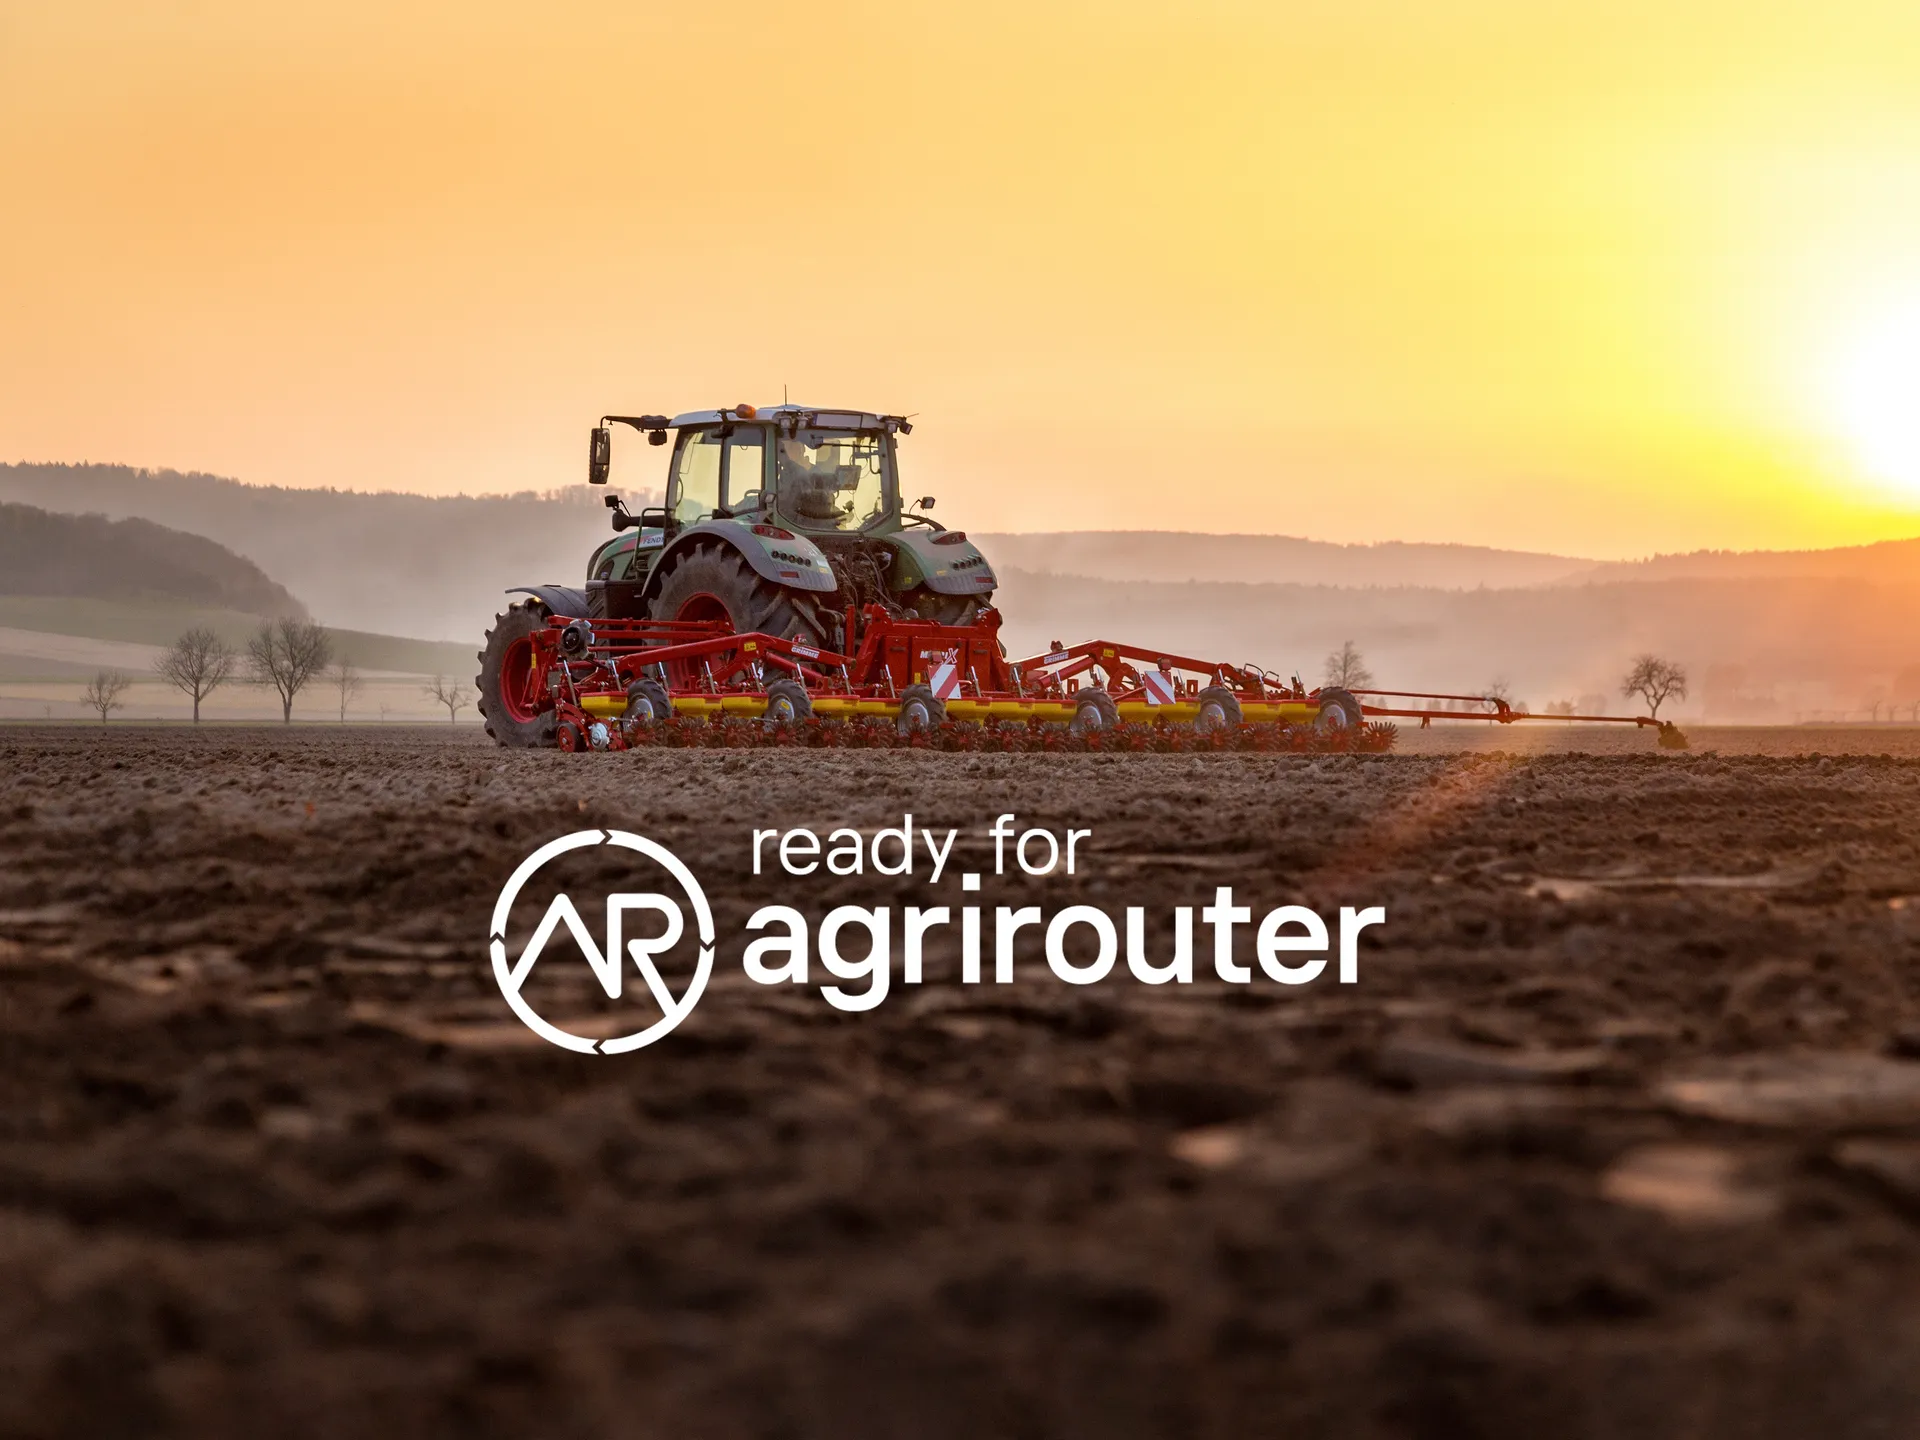 agrirouter